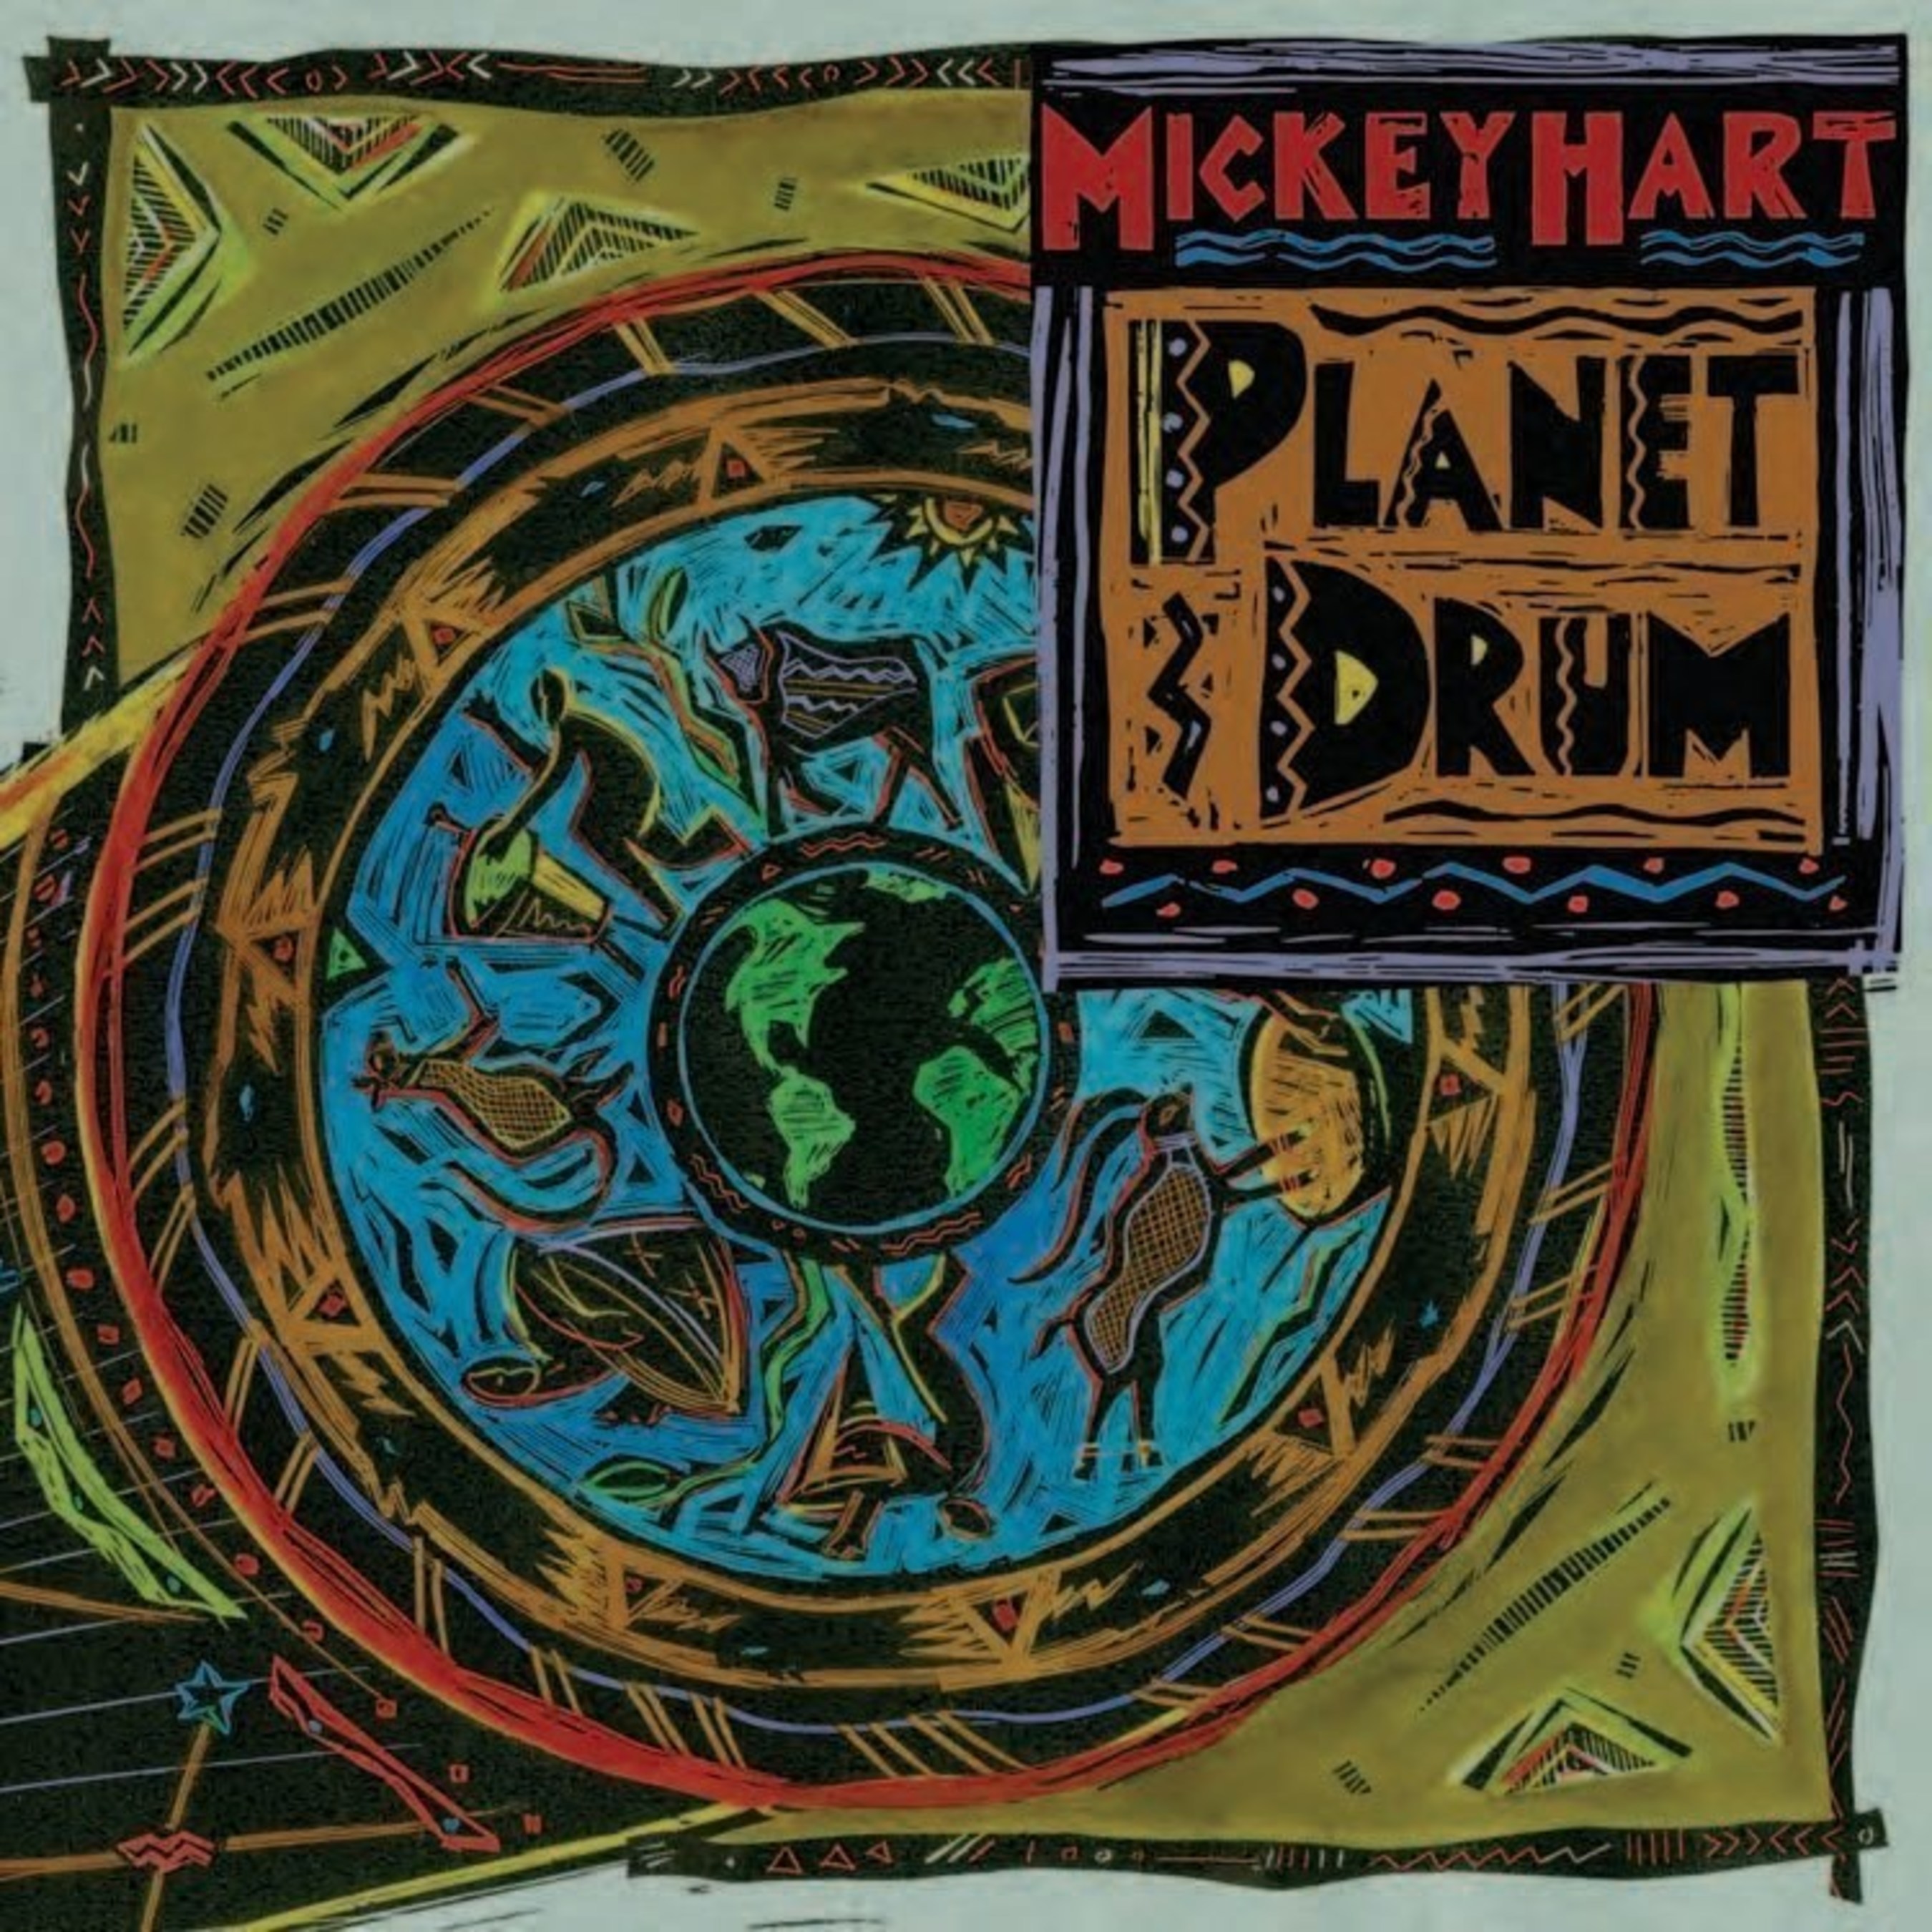 Today marks 25 years since the release of Mickey Hart's groundbreaking album, Planet Drum